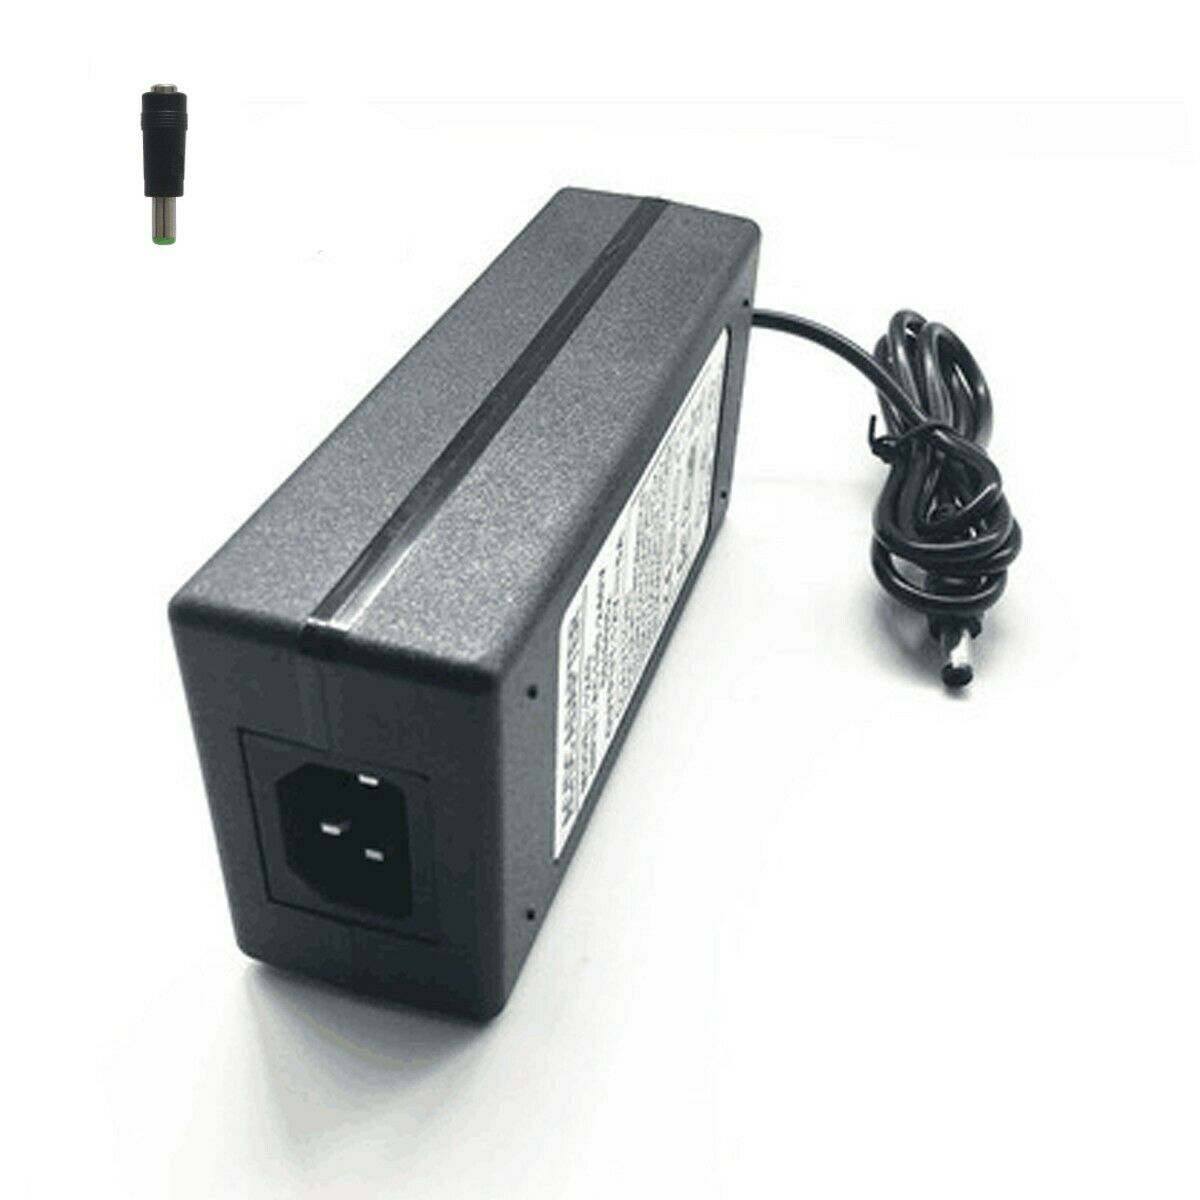 AC Adapter fit Fargo Quatro ID Card 520 Printer 081410 720 series Printer Brand: Unbranded Type: Adapter Compatible